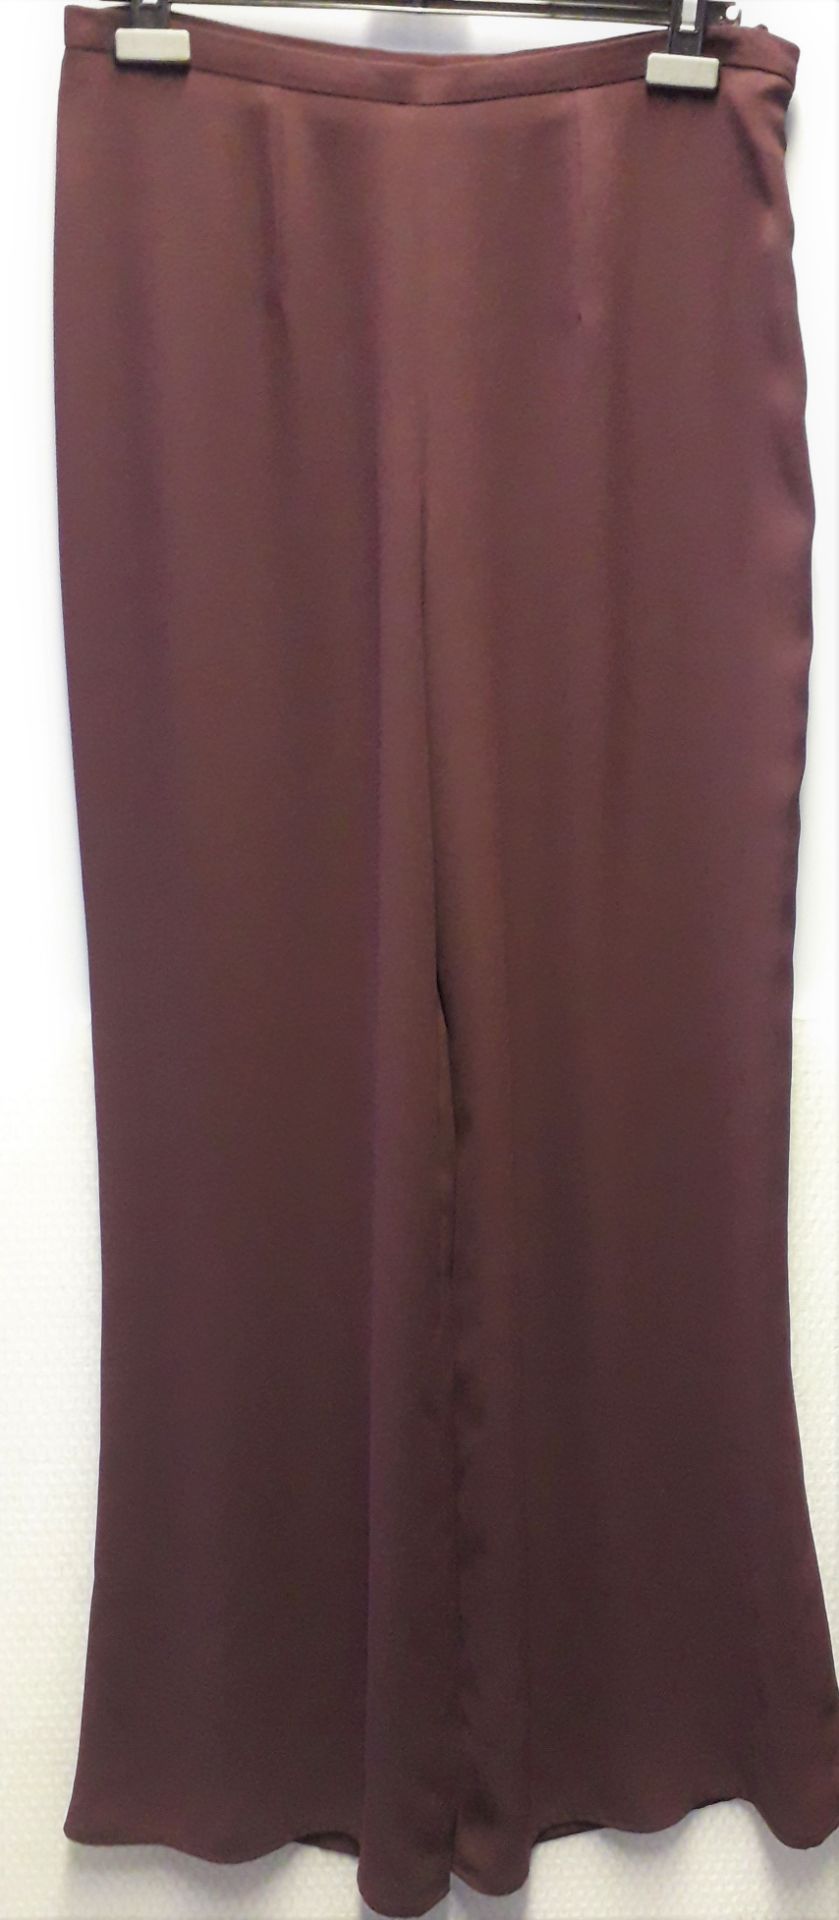 1 x Anne Belin Grape Wide Leg Trousers - Size: 20 - Material: 100% Polyester - From a High End